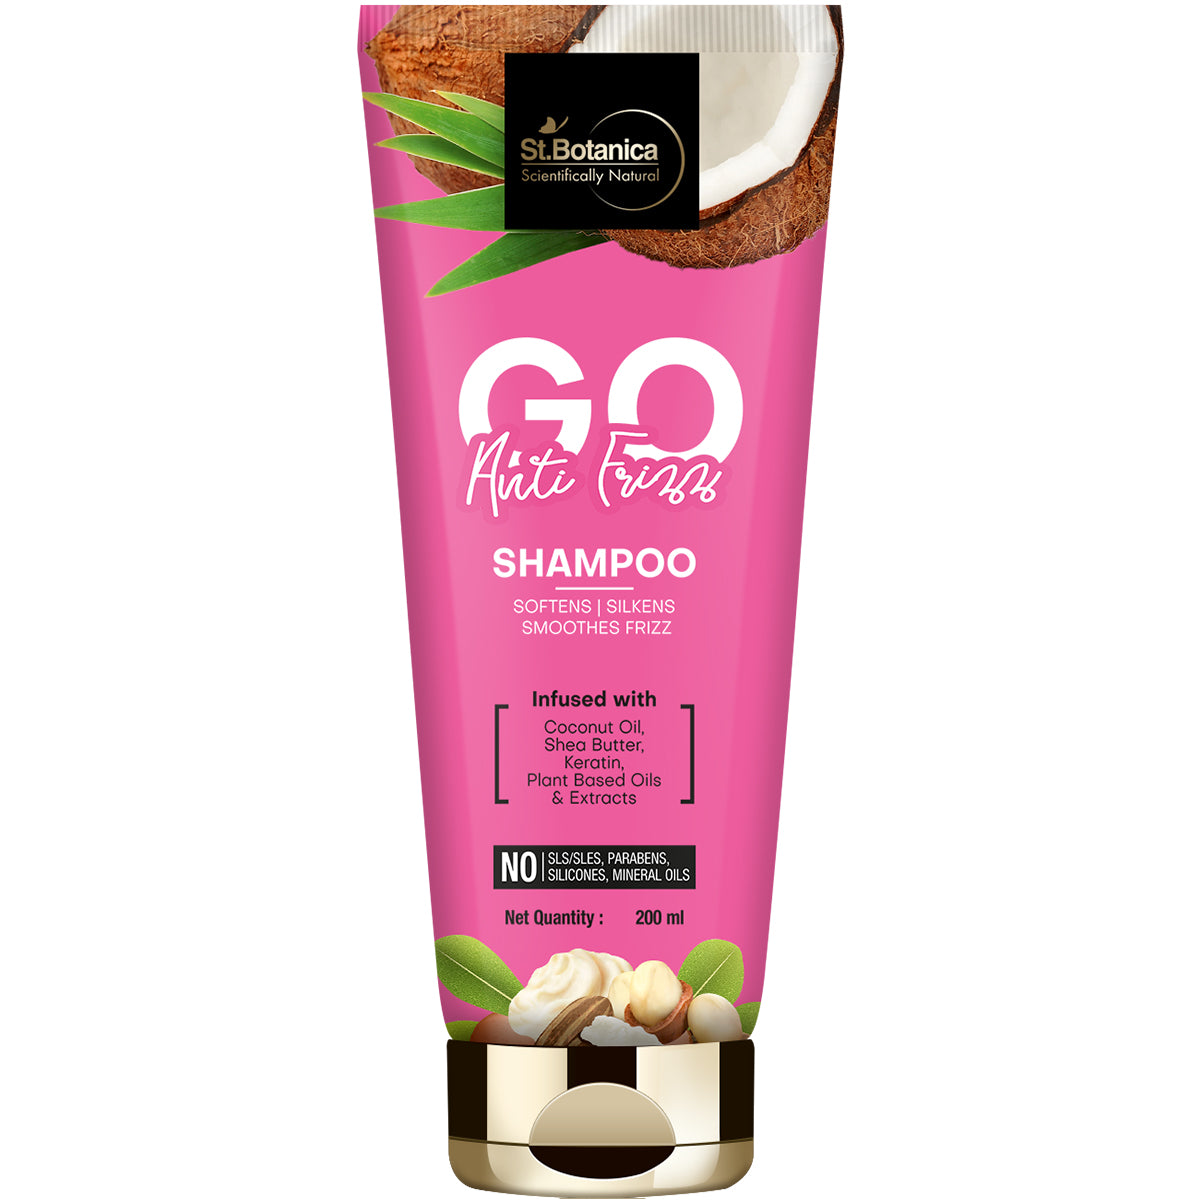 St.Botanica GO Anti-Frizz Hair Shampoo - With Coconut Oil, Shea Butter, Keratin, No SLS/Sulphate, Paraben, Silicones, Colors, 200ml